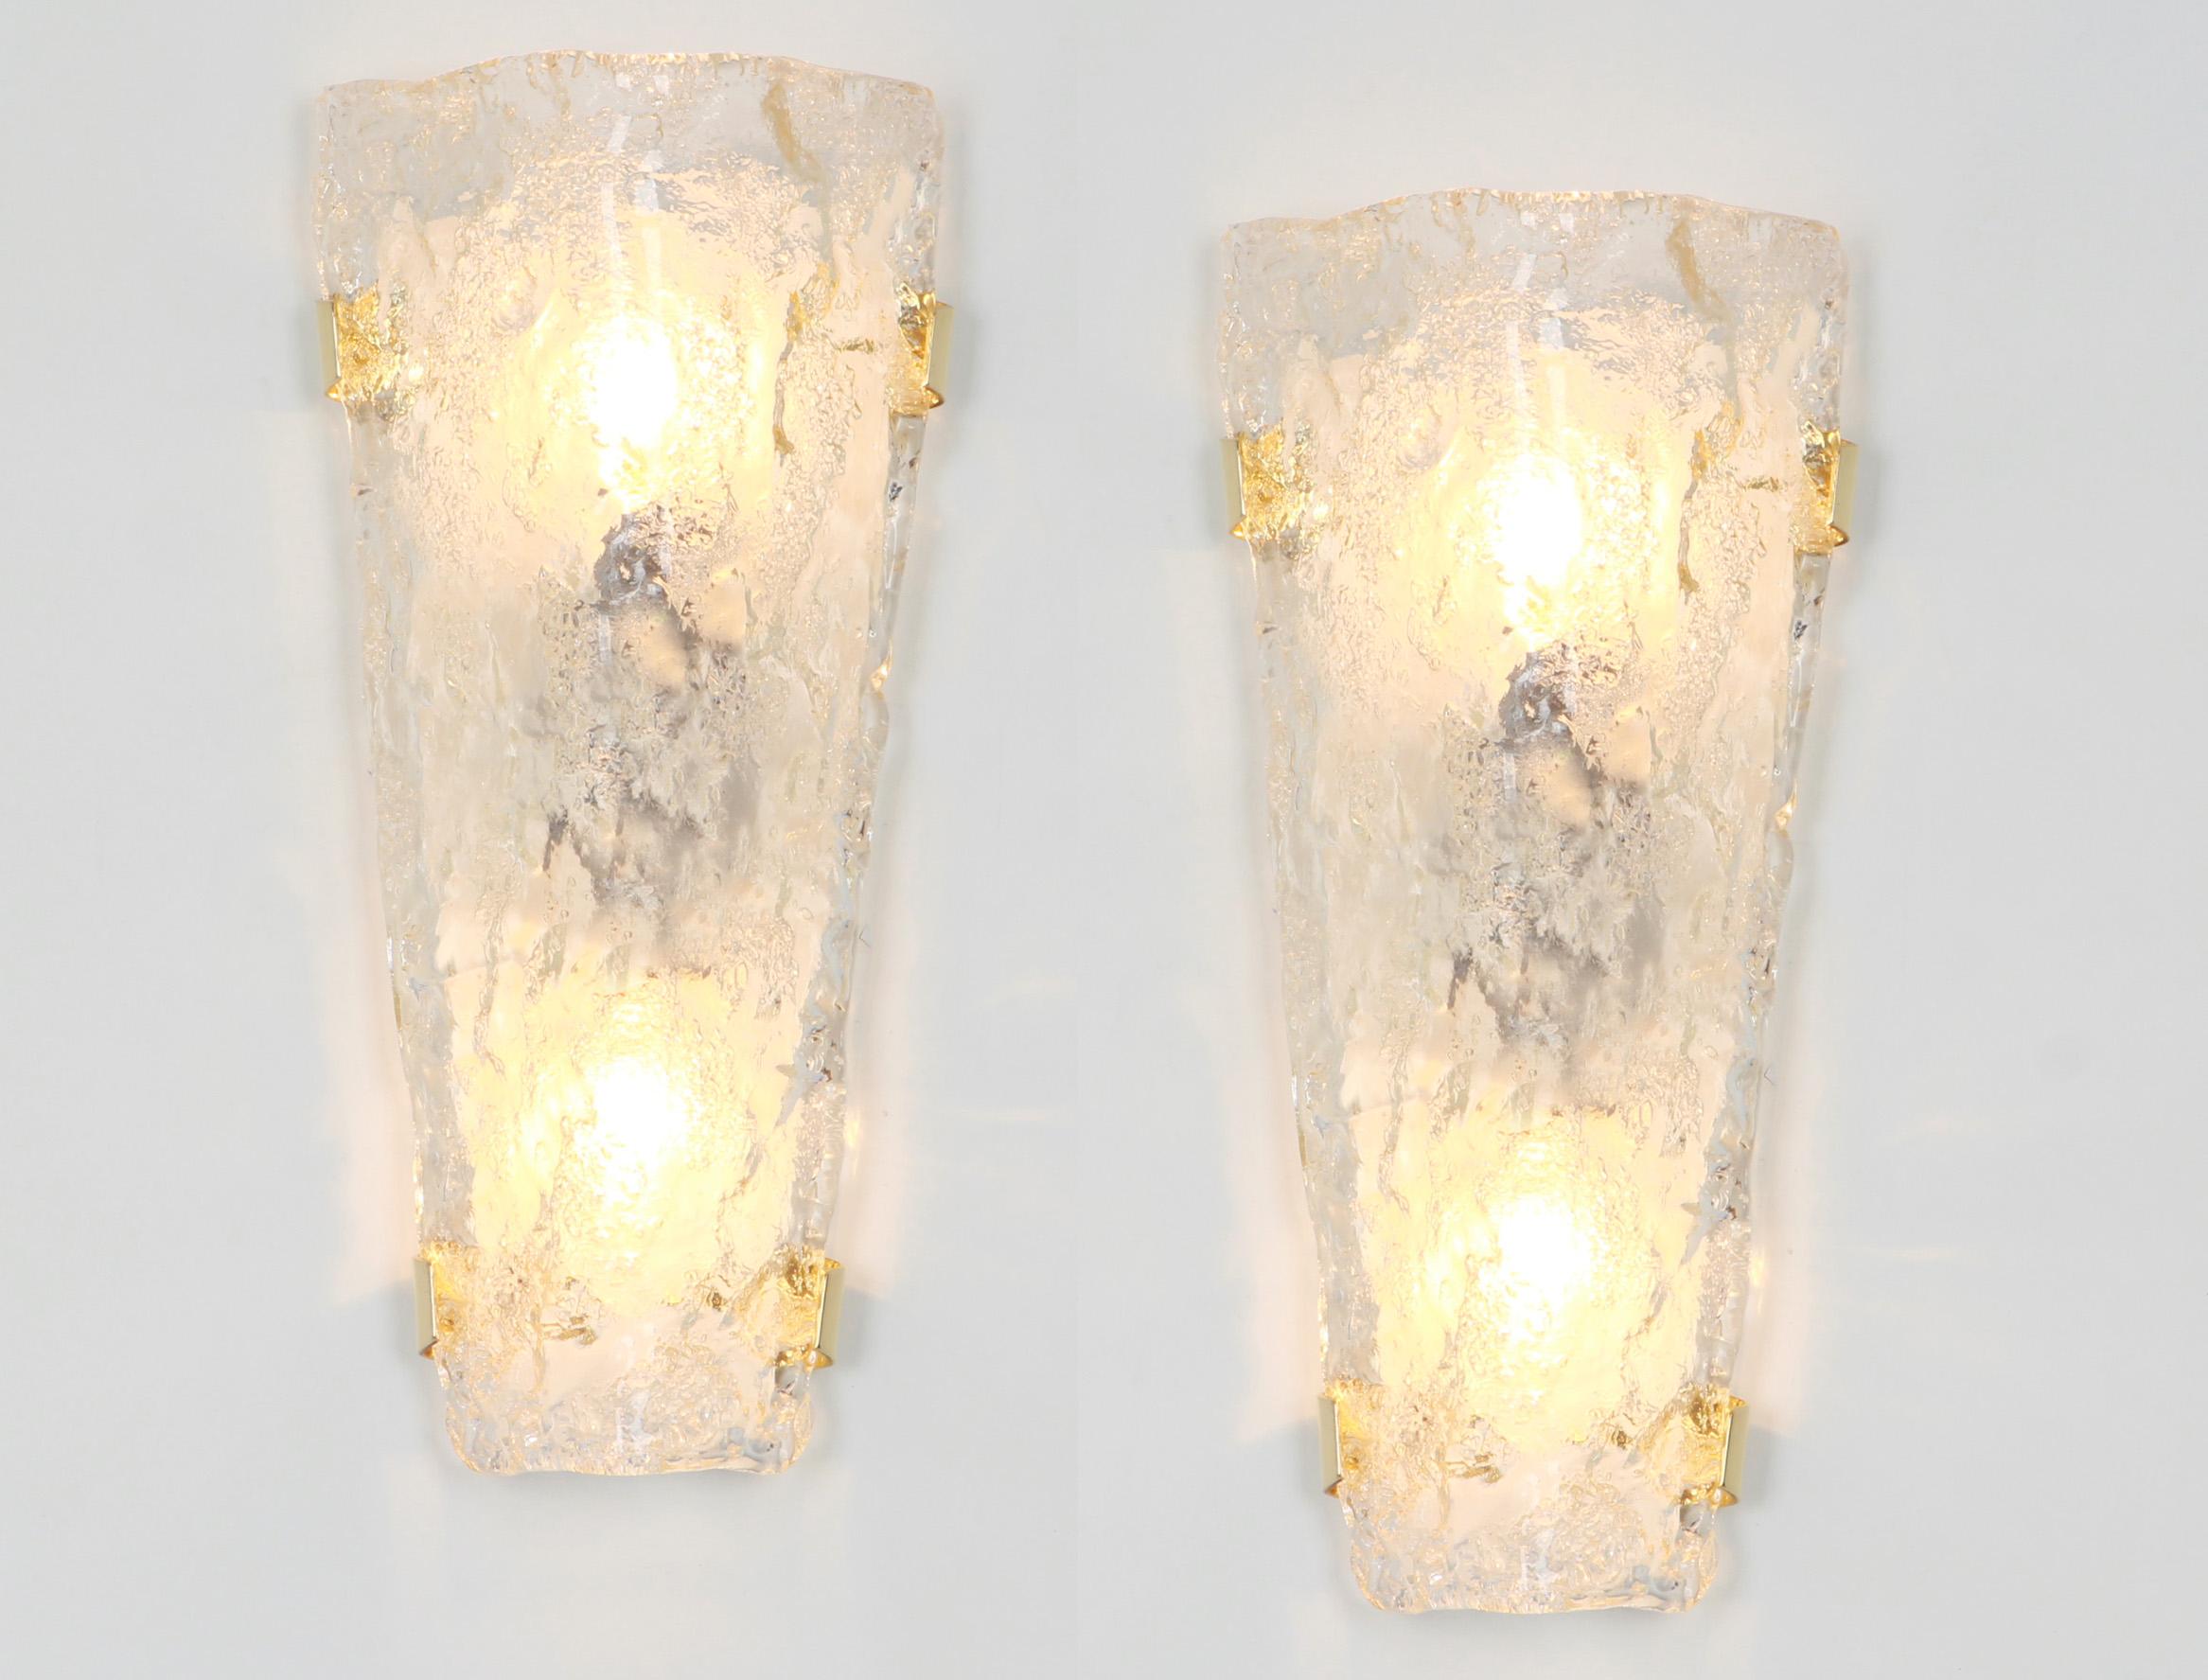 Set of 3 Large Vanity Angular Murano Glass Sconces by Hillebrand, Germany, 1960s For Sale 7